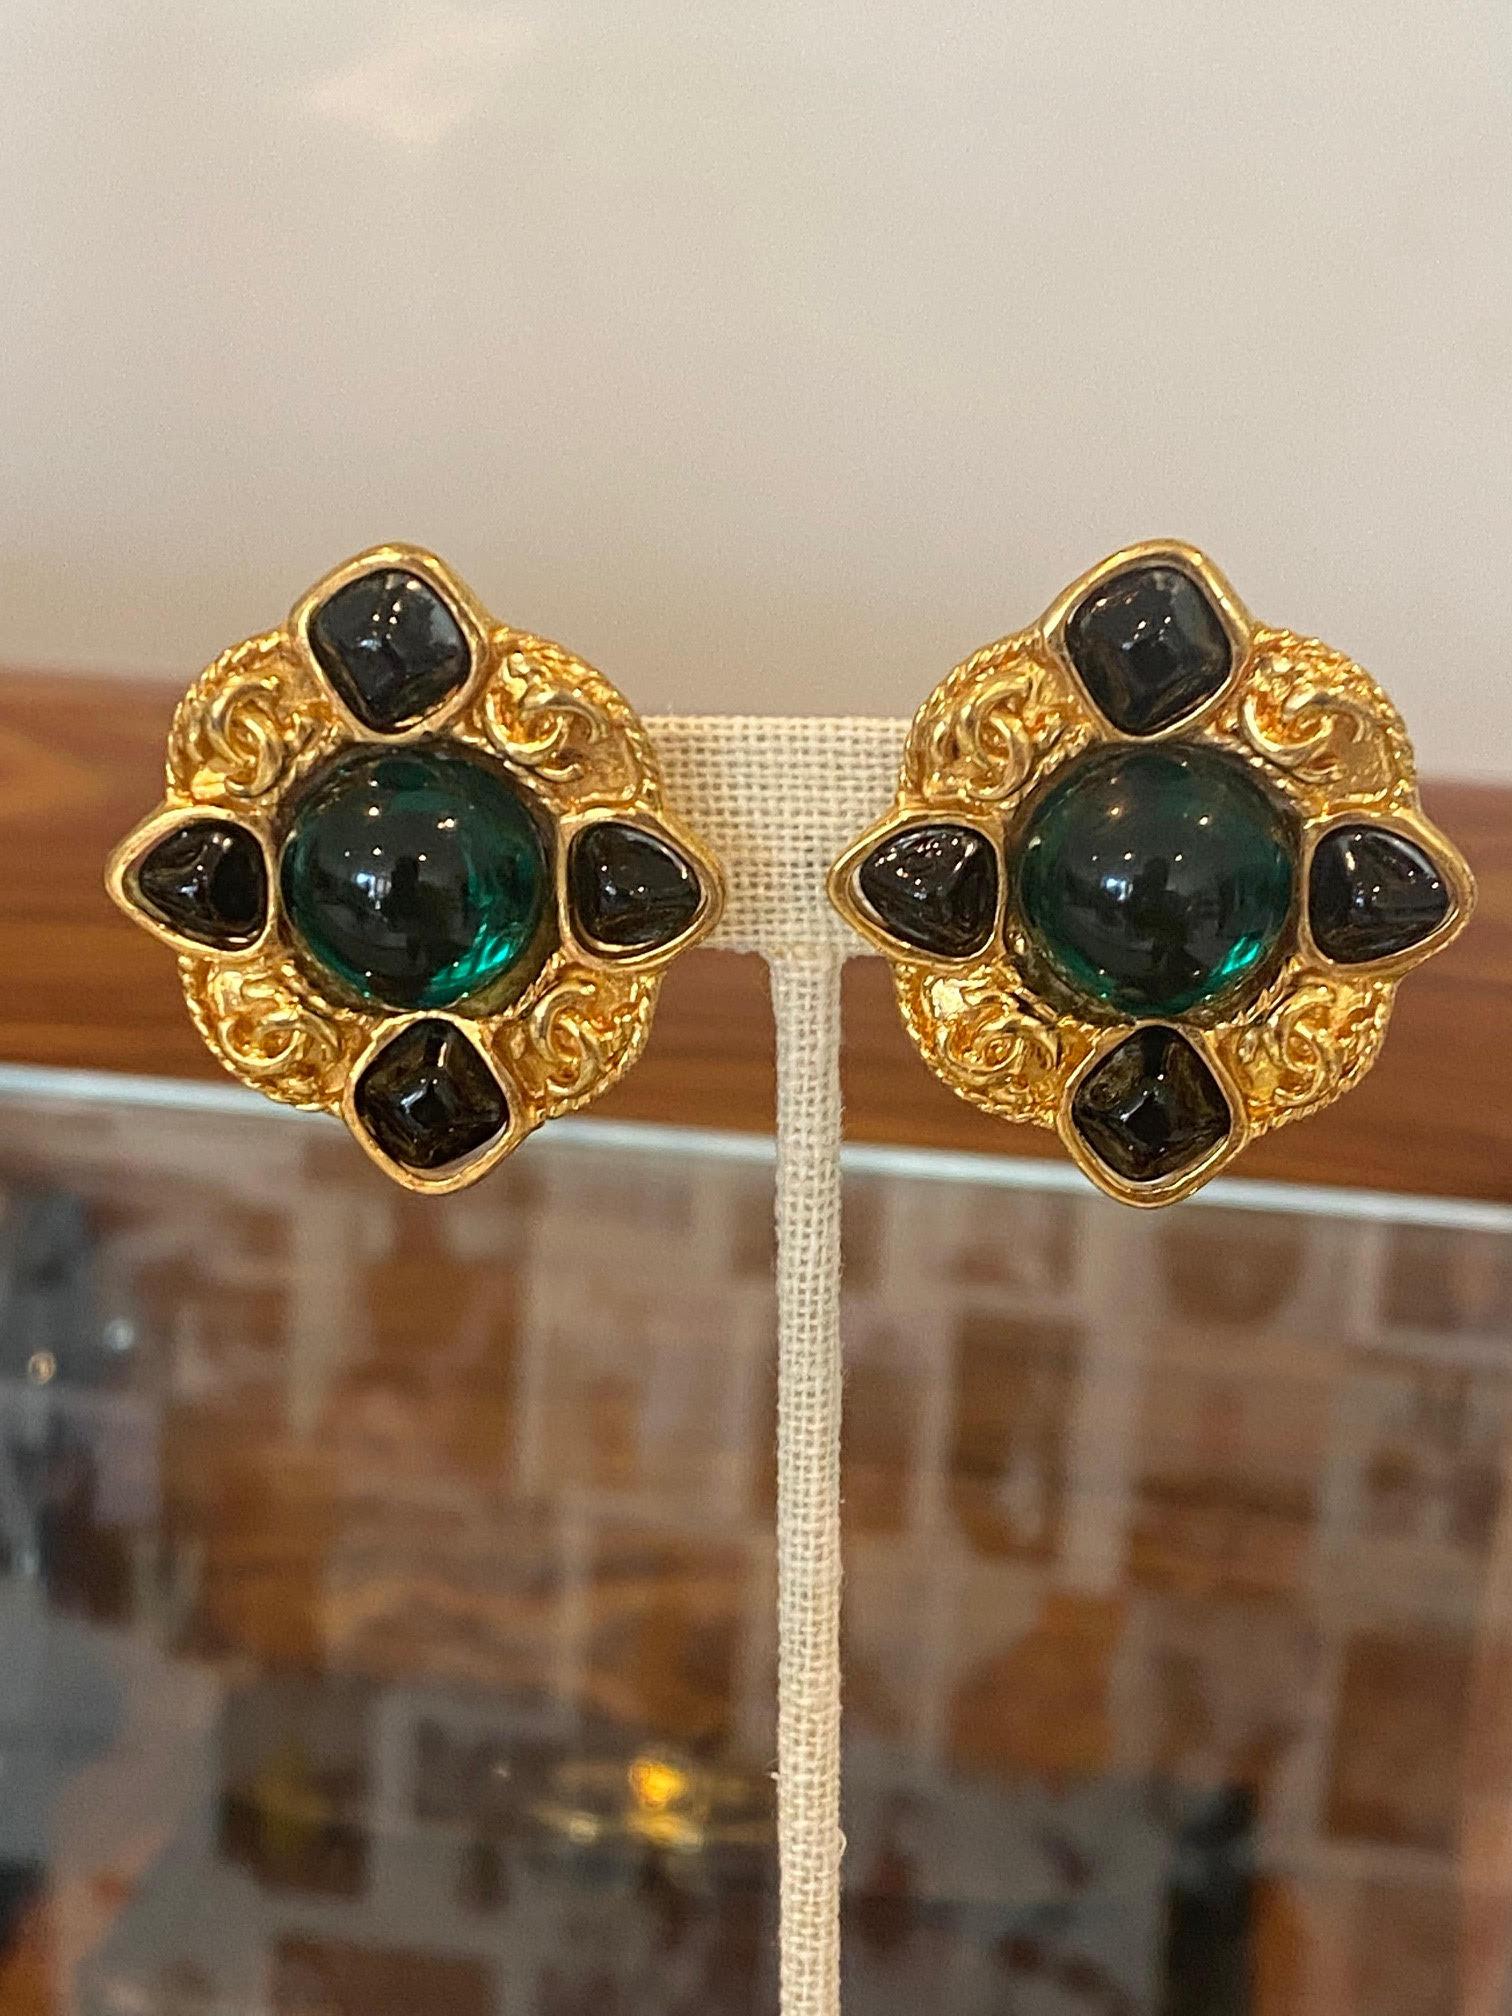 pair of stunning Large Chanel Gripoix glass earrings made in France in 1995.
comes with original box
no notable signs of wear in very good condition